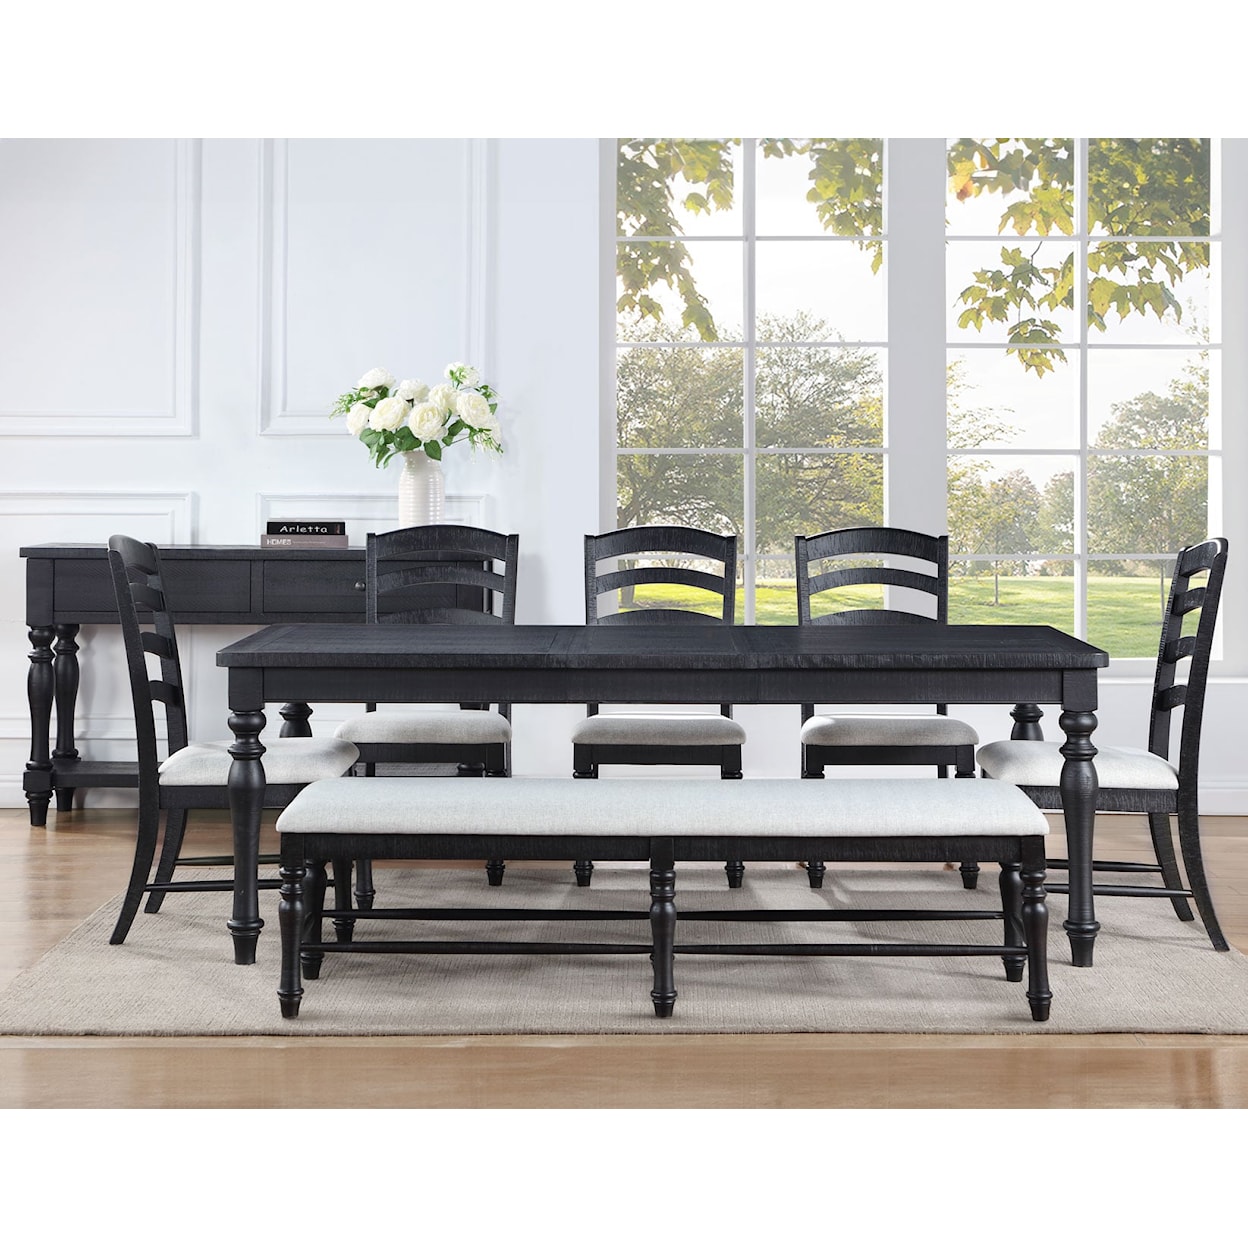 Prime Odessa Dining Table